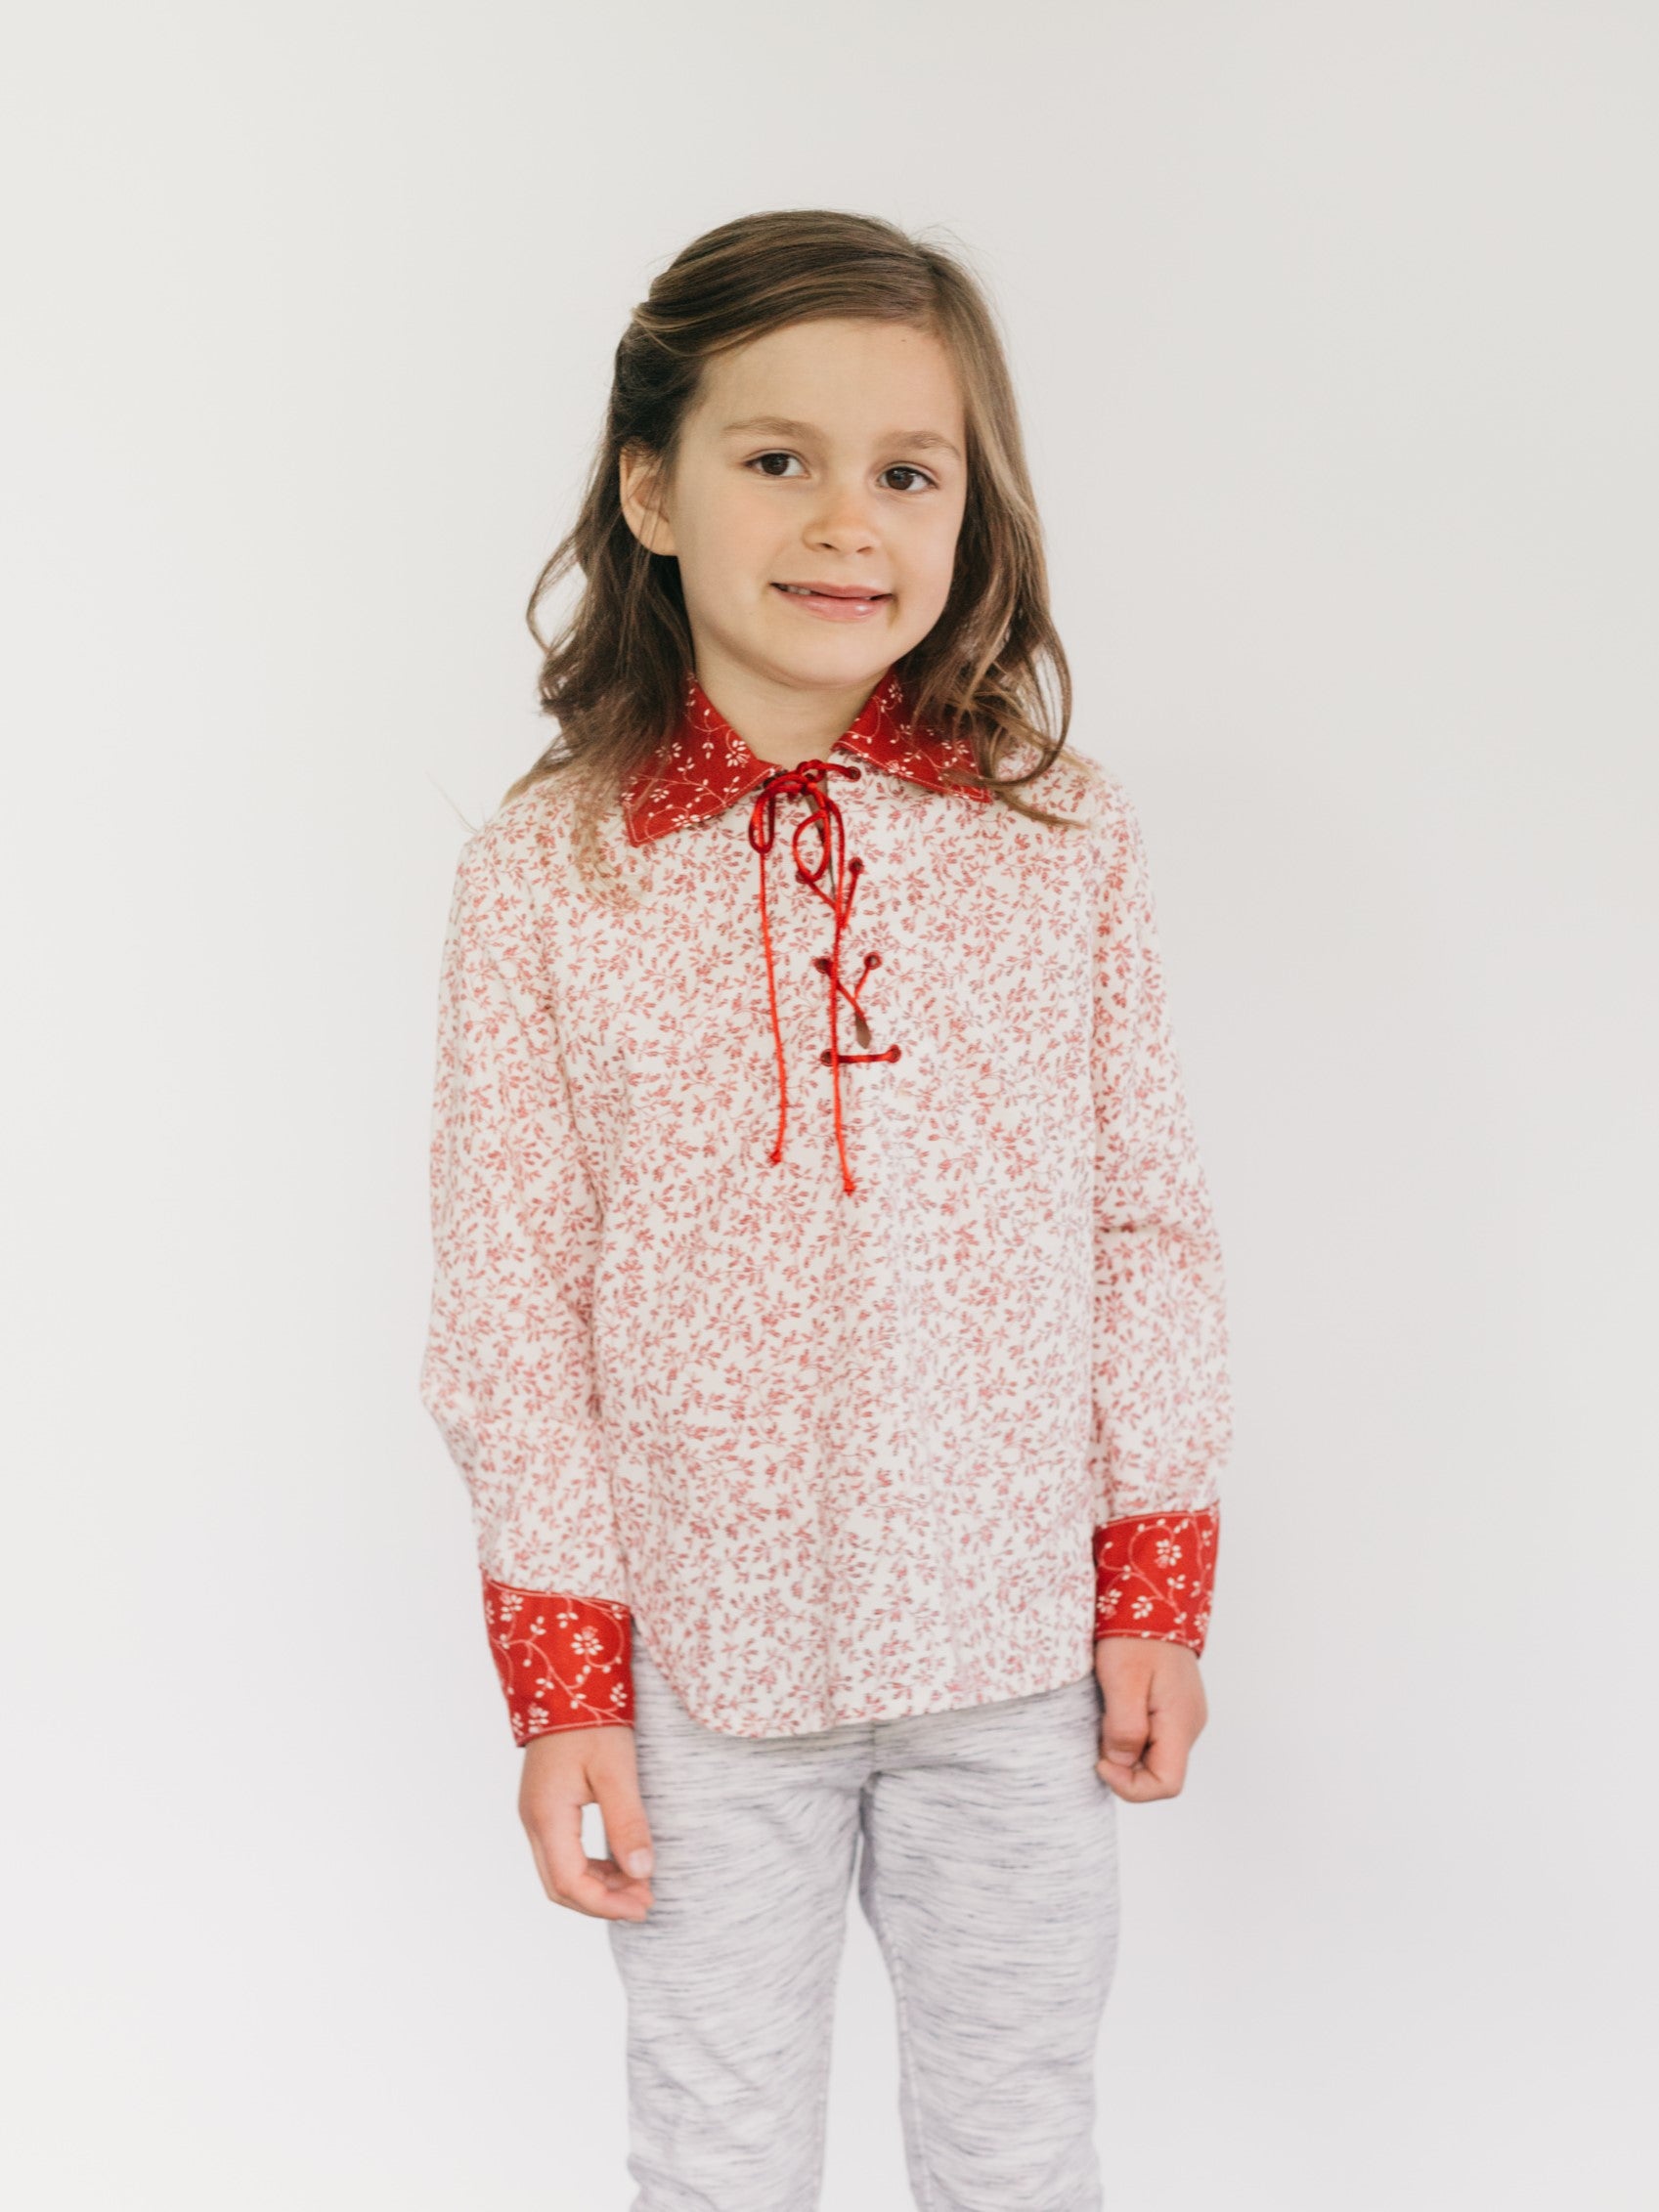 Young girl in a red floral Western shirt.